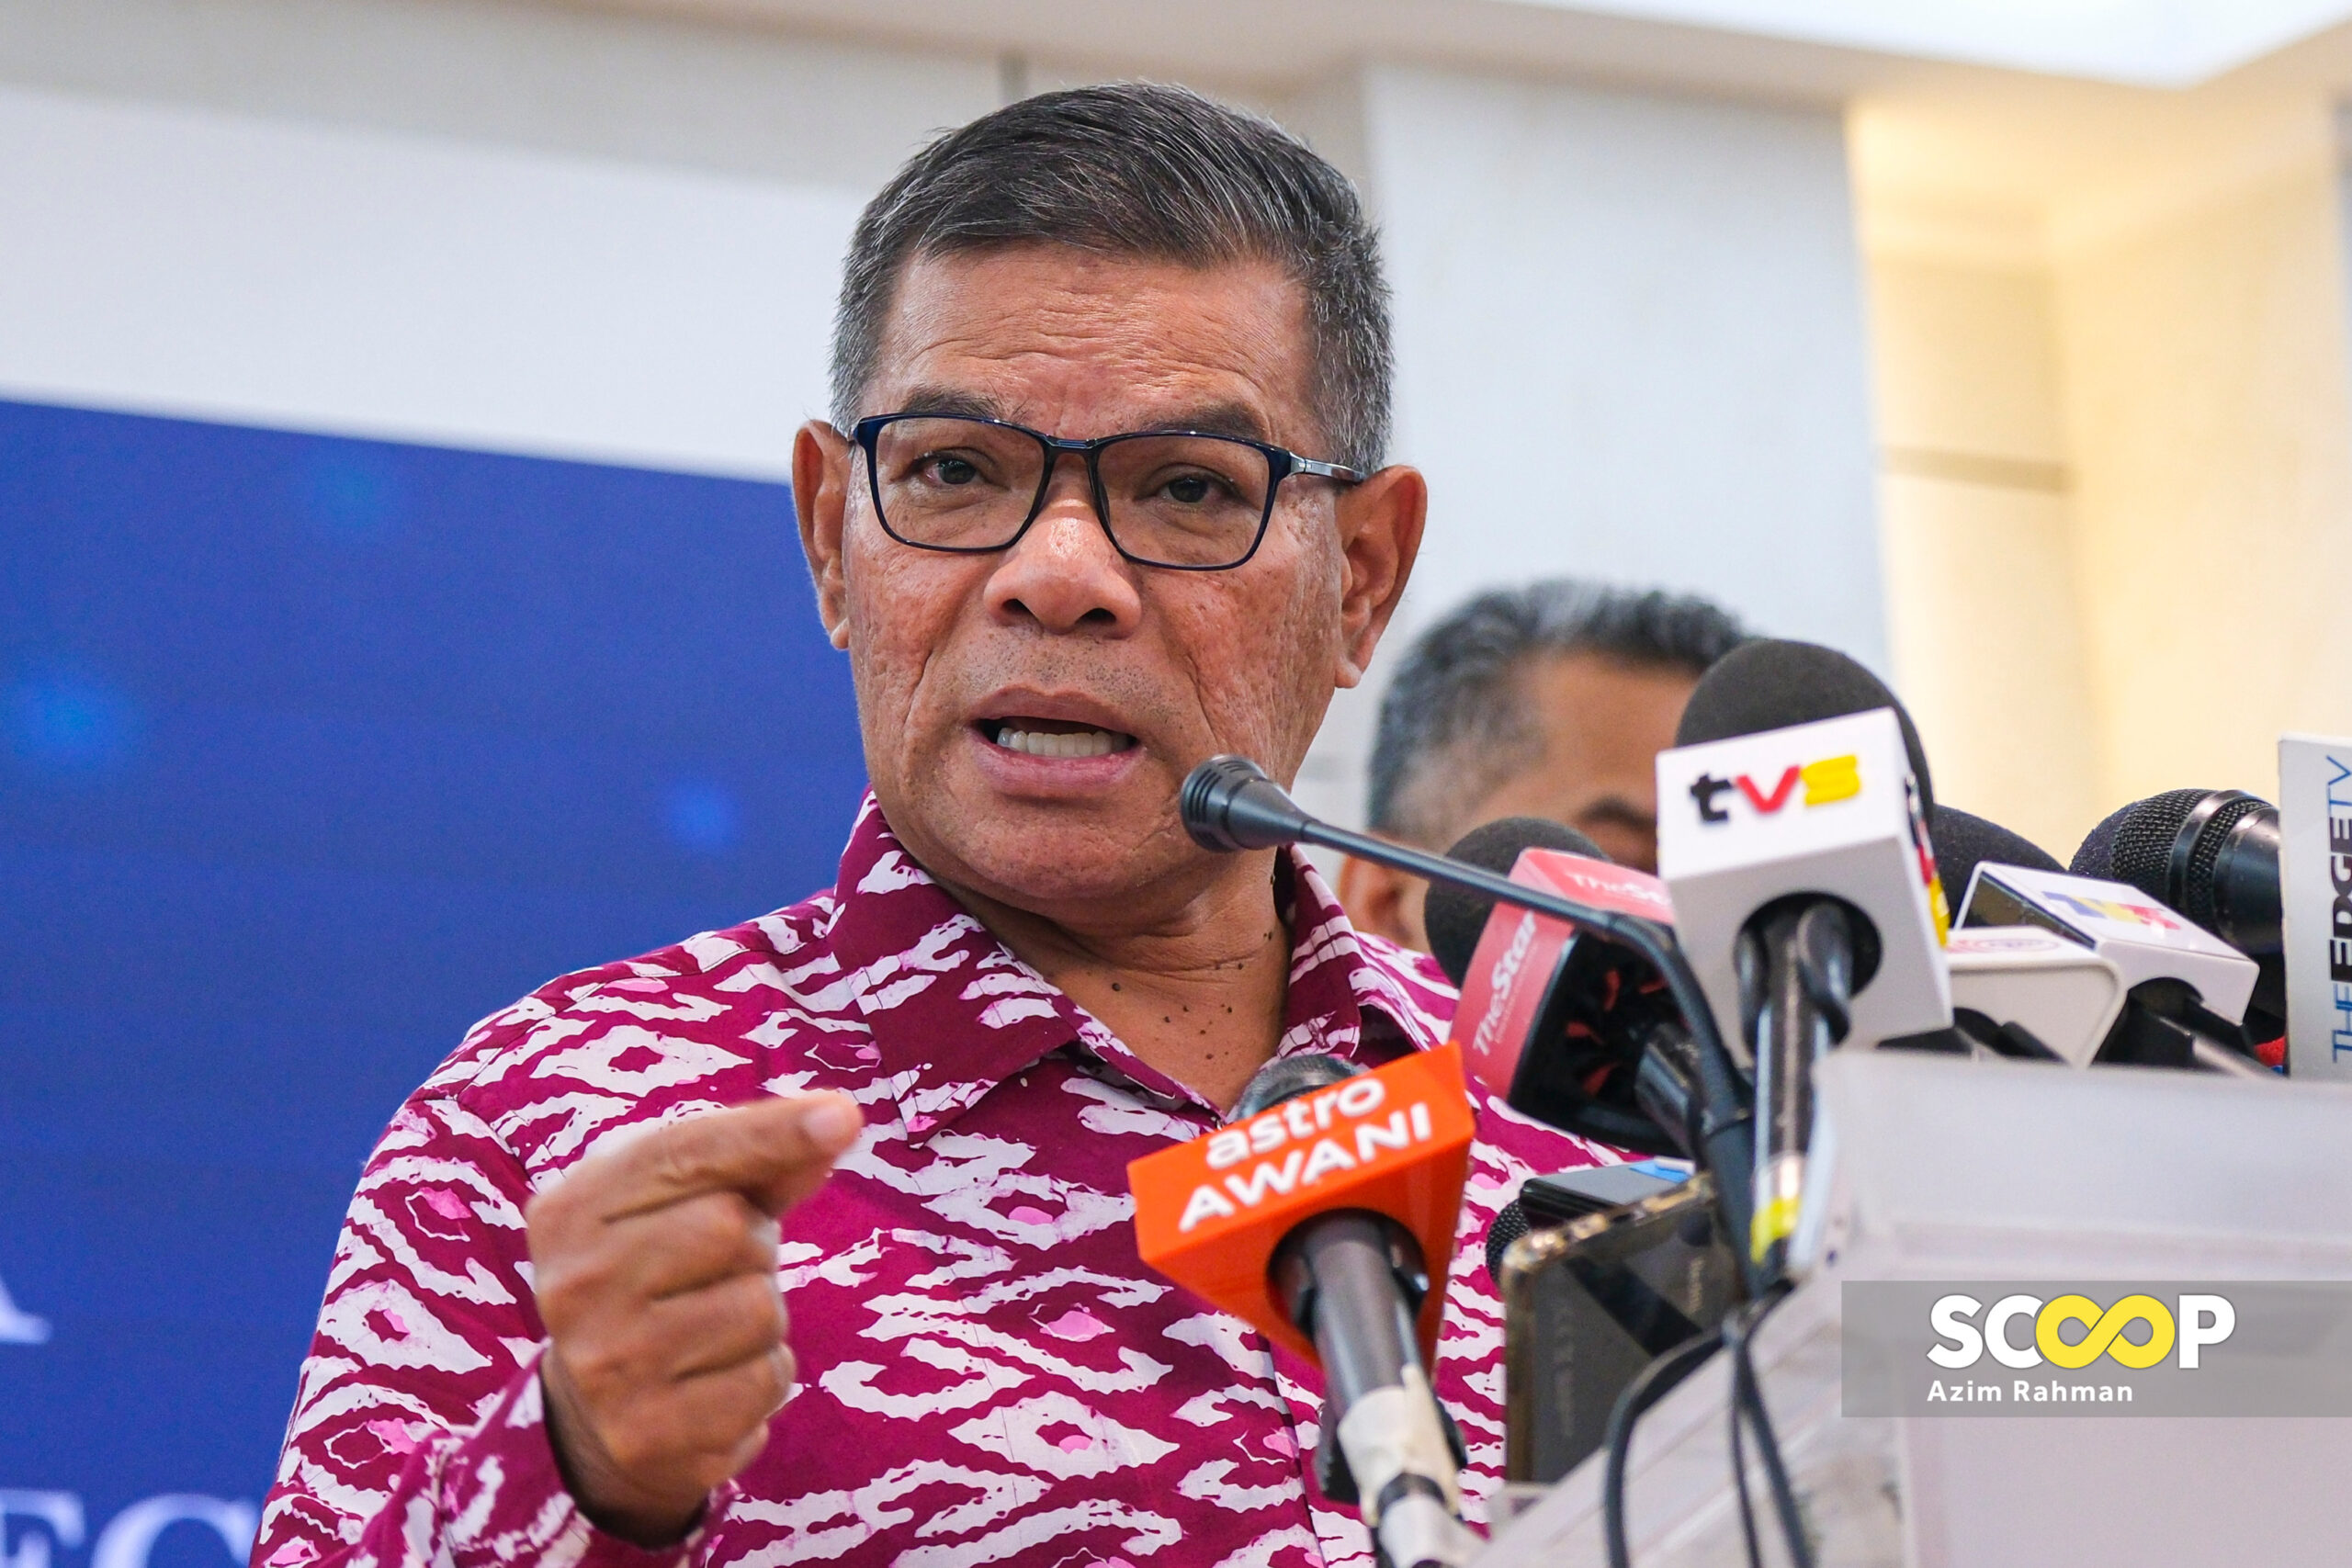 Anti-Anwar protest shows govt’s respect for peaceful protest: Saifuddin